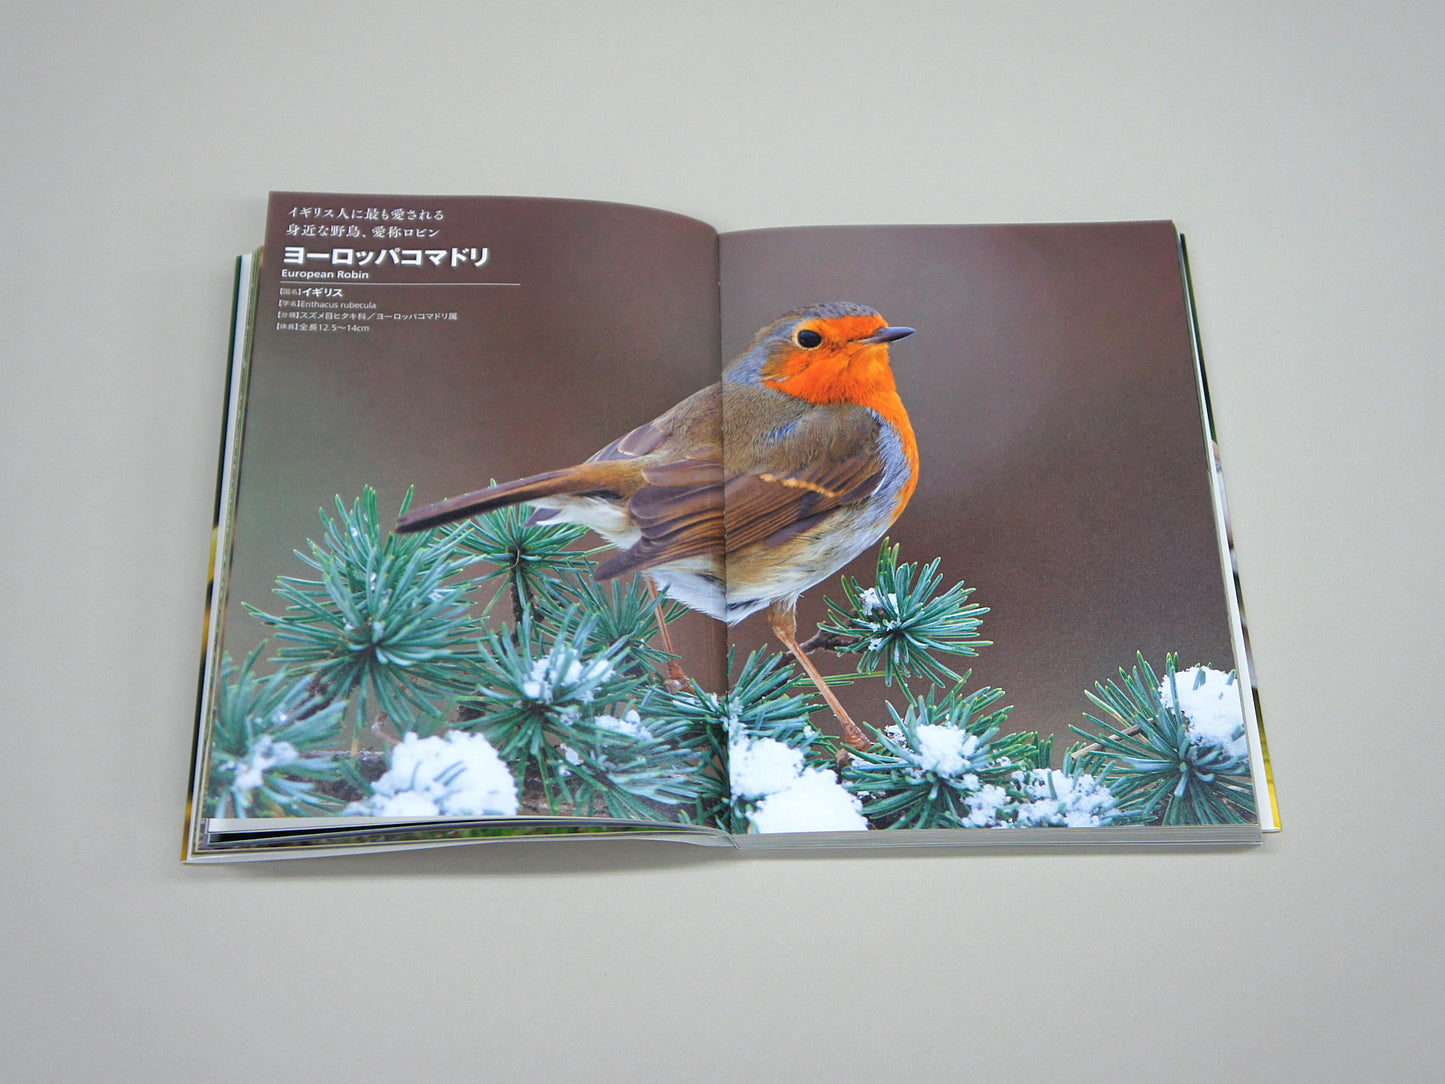 National Birds Around The World by Nomad Books